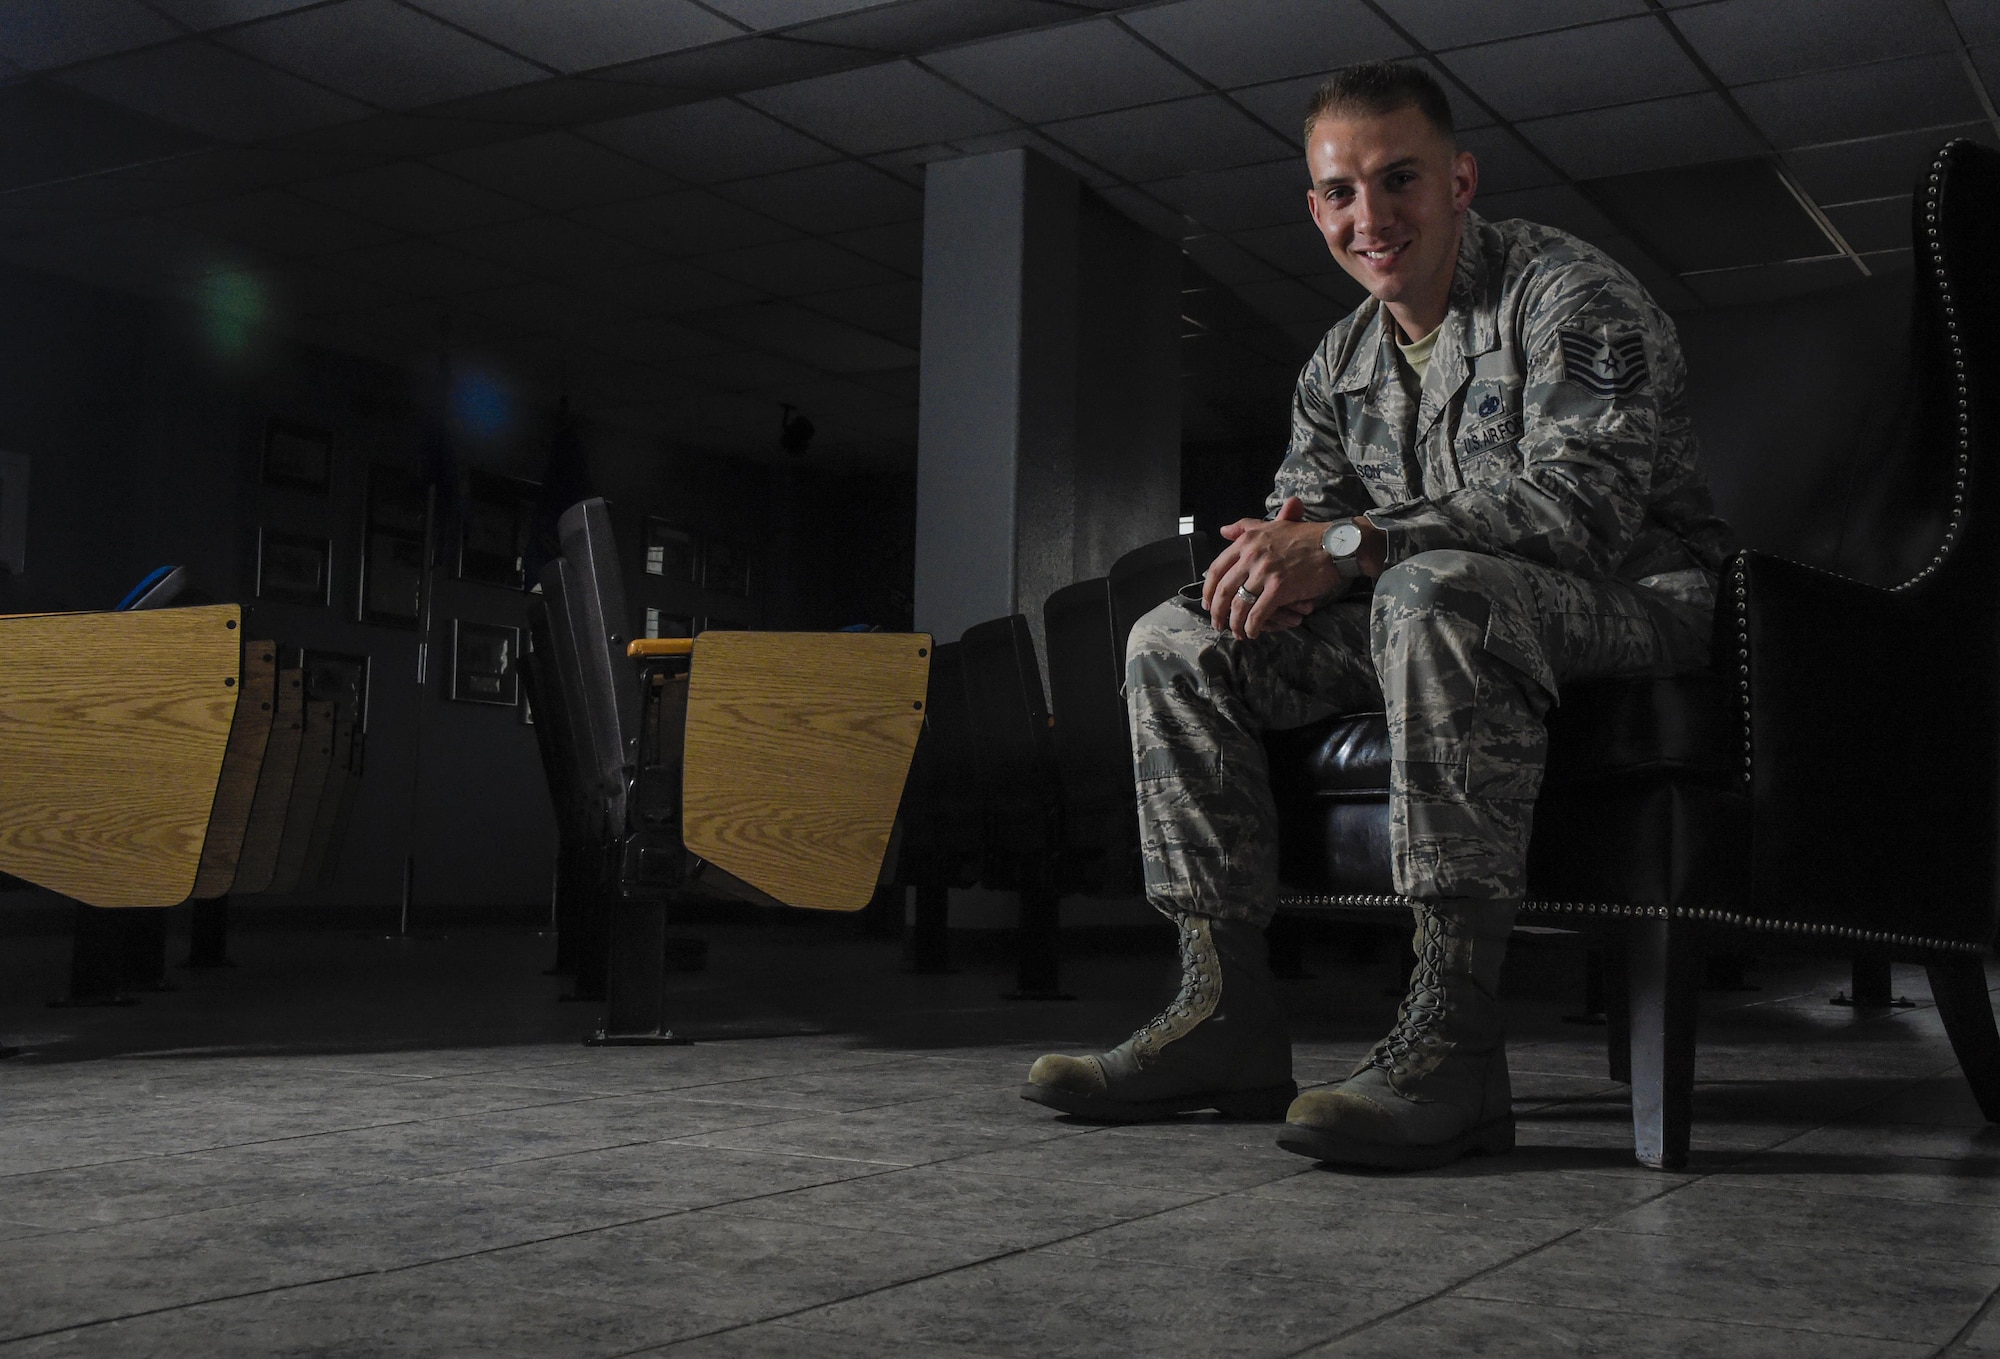 Tech. Sgt. Kyle Wilson, 56th Equipment Maintenance Squadron aerospace ground equipment support NCO in charge, has been awarded as one of the Air Force’s 12 Outstanding Airmen of the Year and attributes his success to his rigorous fitness routine and family.